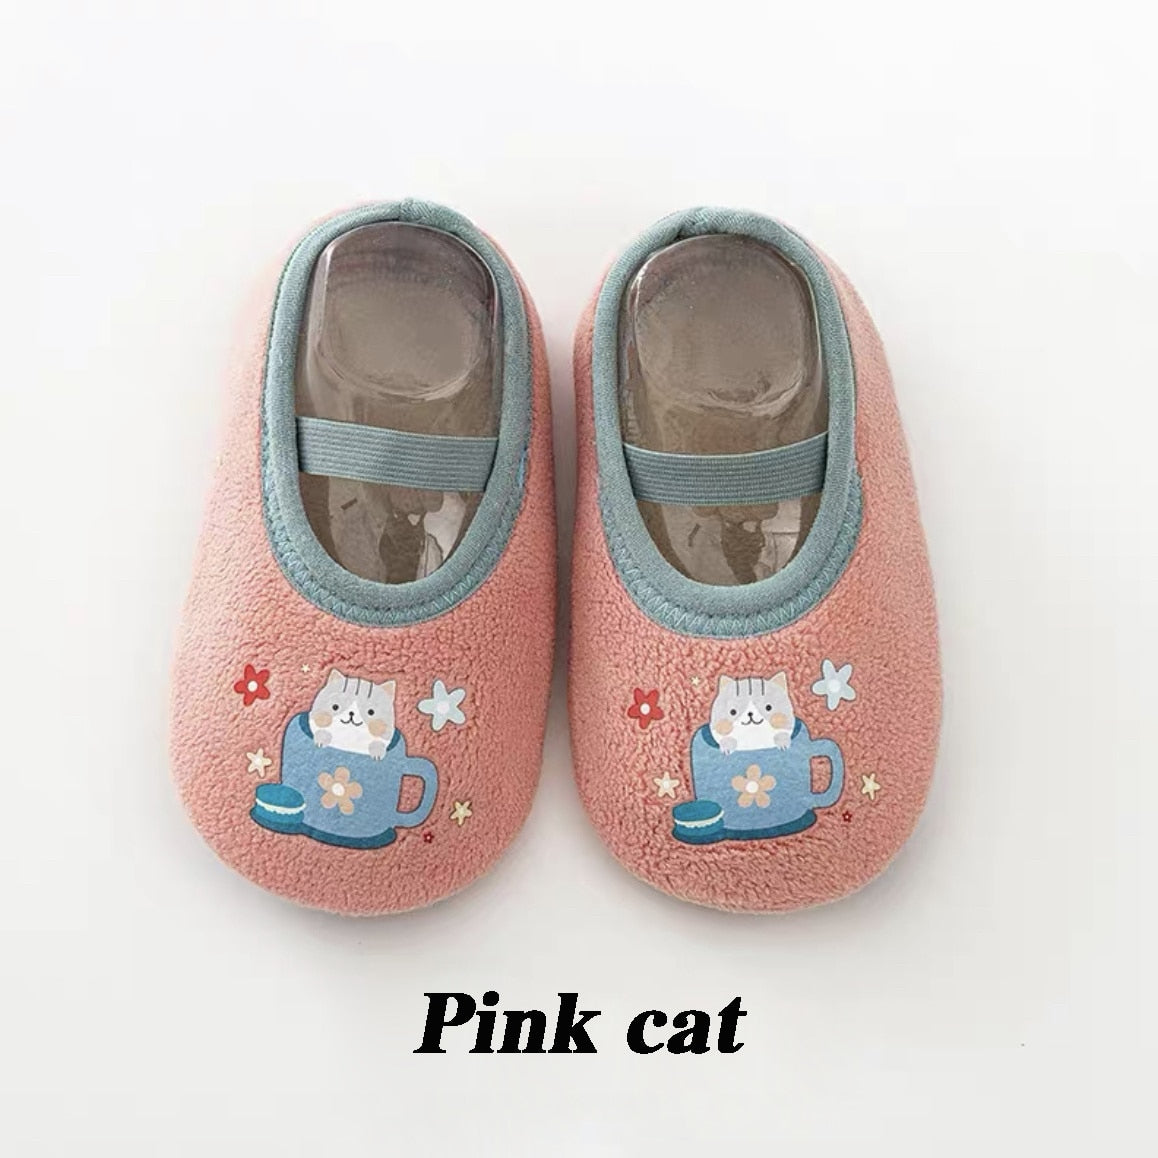 Baby Anti-slip Socks Newborn Warm Crib Floor Shoes with Rubber Sole for Children Boy Toddler Foot Girl Infant Cute Kids Slippers